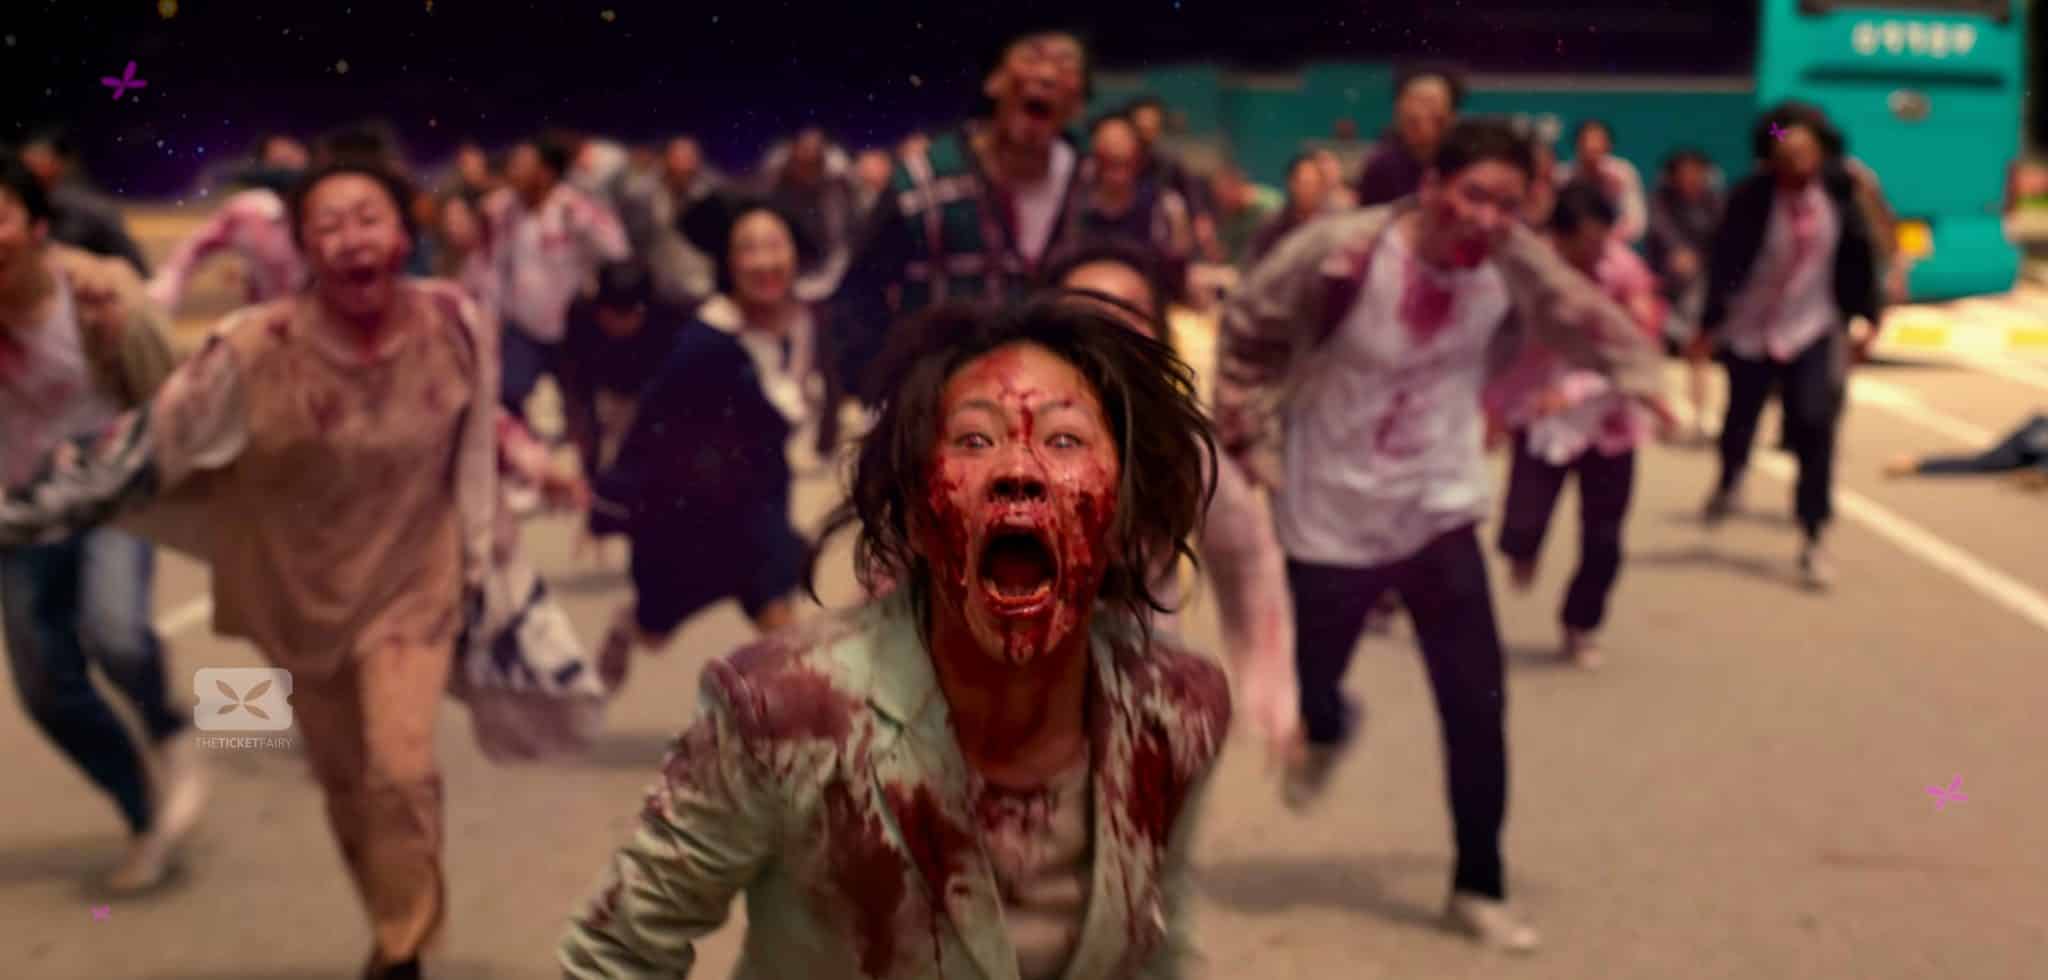 All Of Us Are Dead review: Everything the Hallyu wave brings in is gold,  including zombies